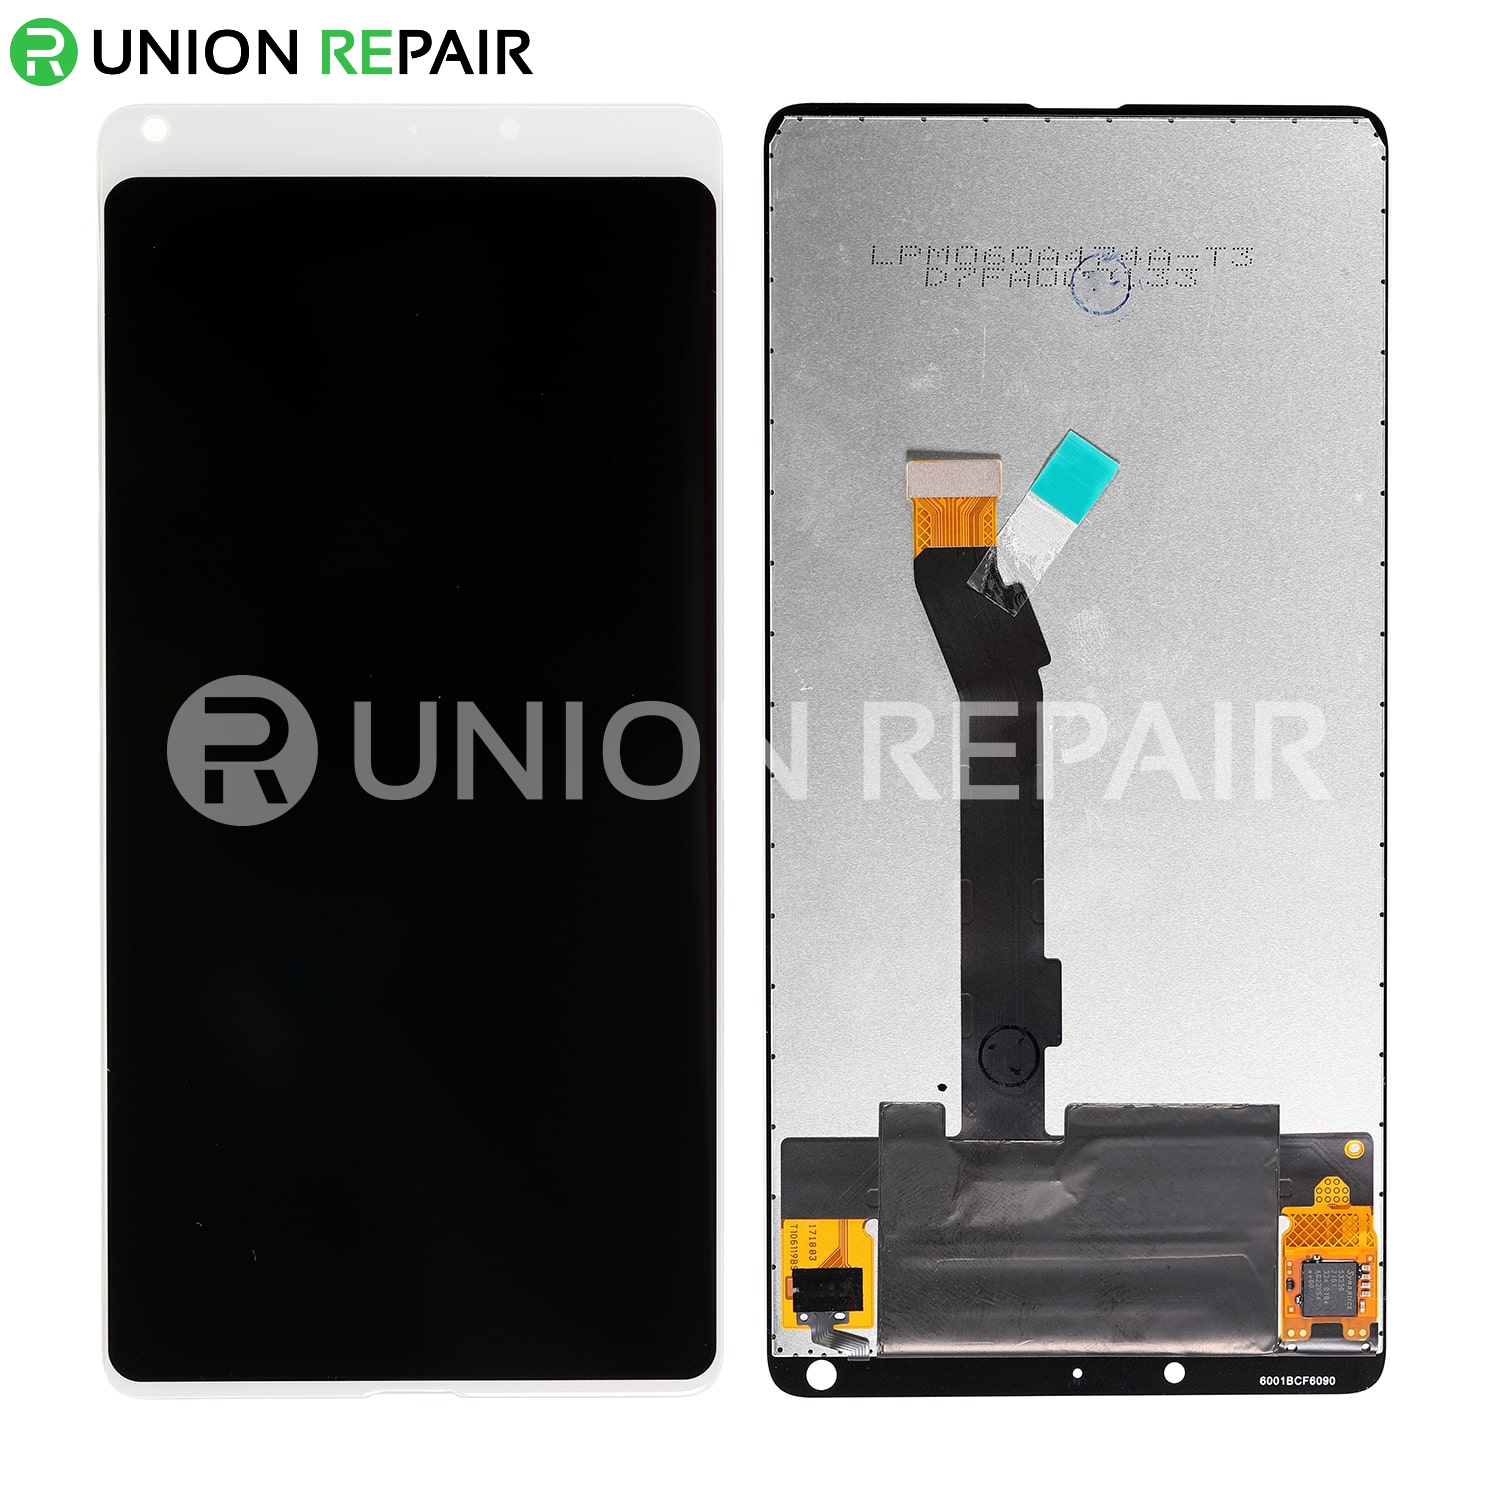 Replacement for XiaoMi MIX 2 LCD Screen Digitizer - White